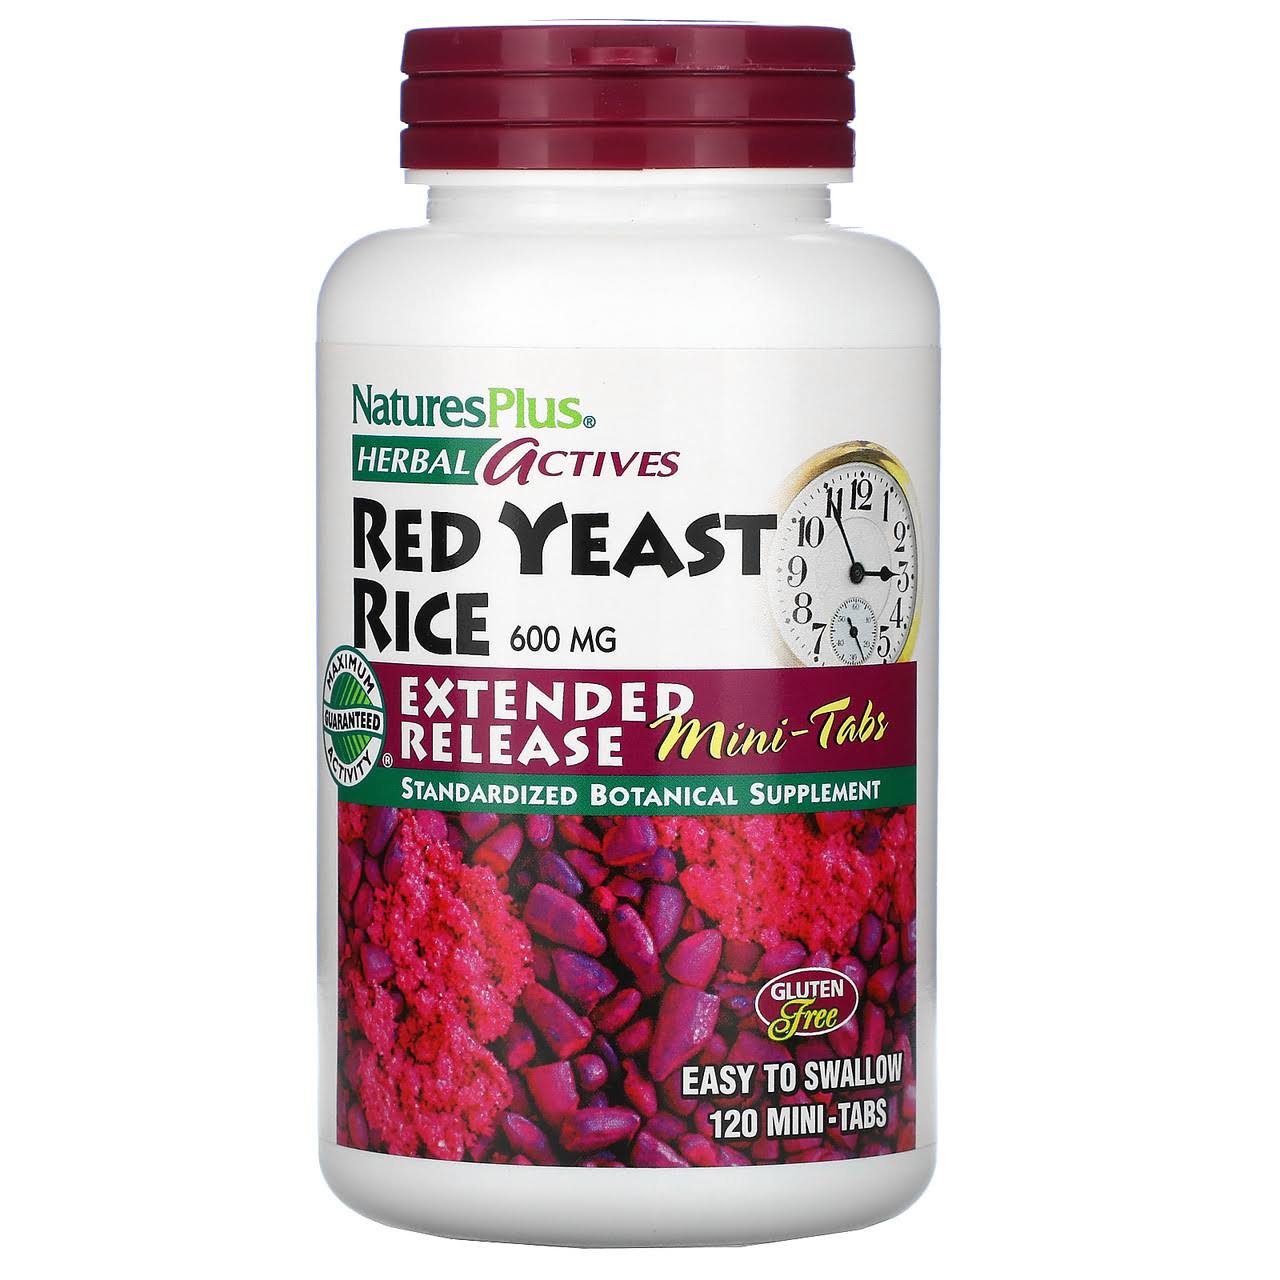 Nature's Plus - Herbal Actives Red Yeast Rice Dietary Supplement - 600mg, 120ct